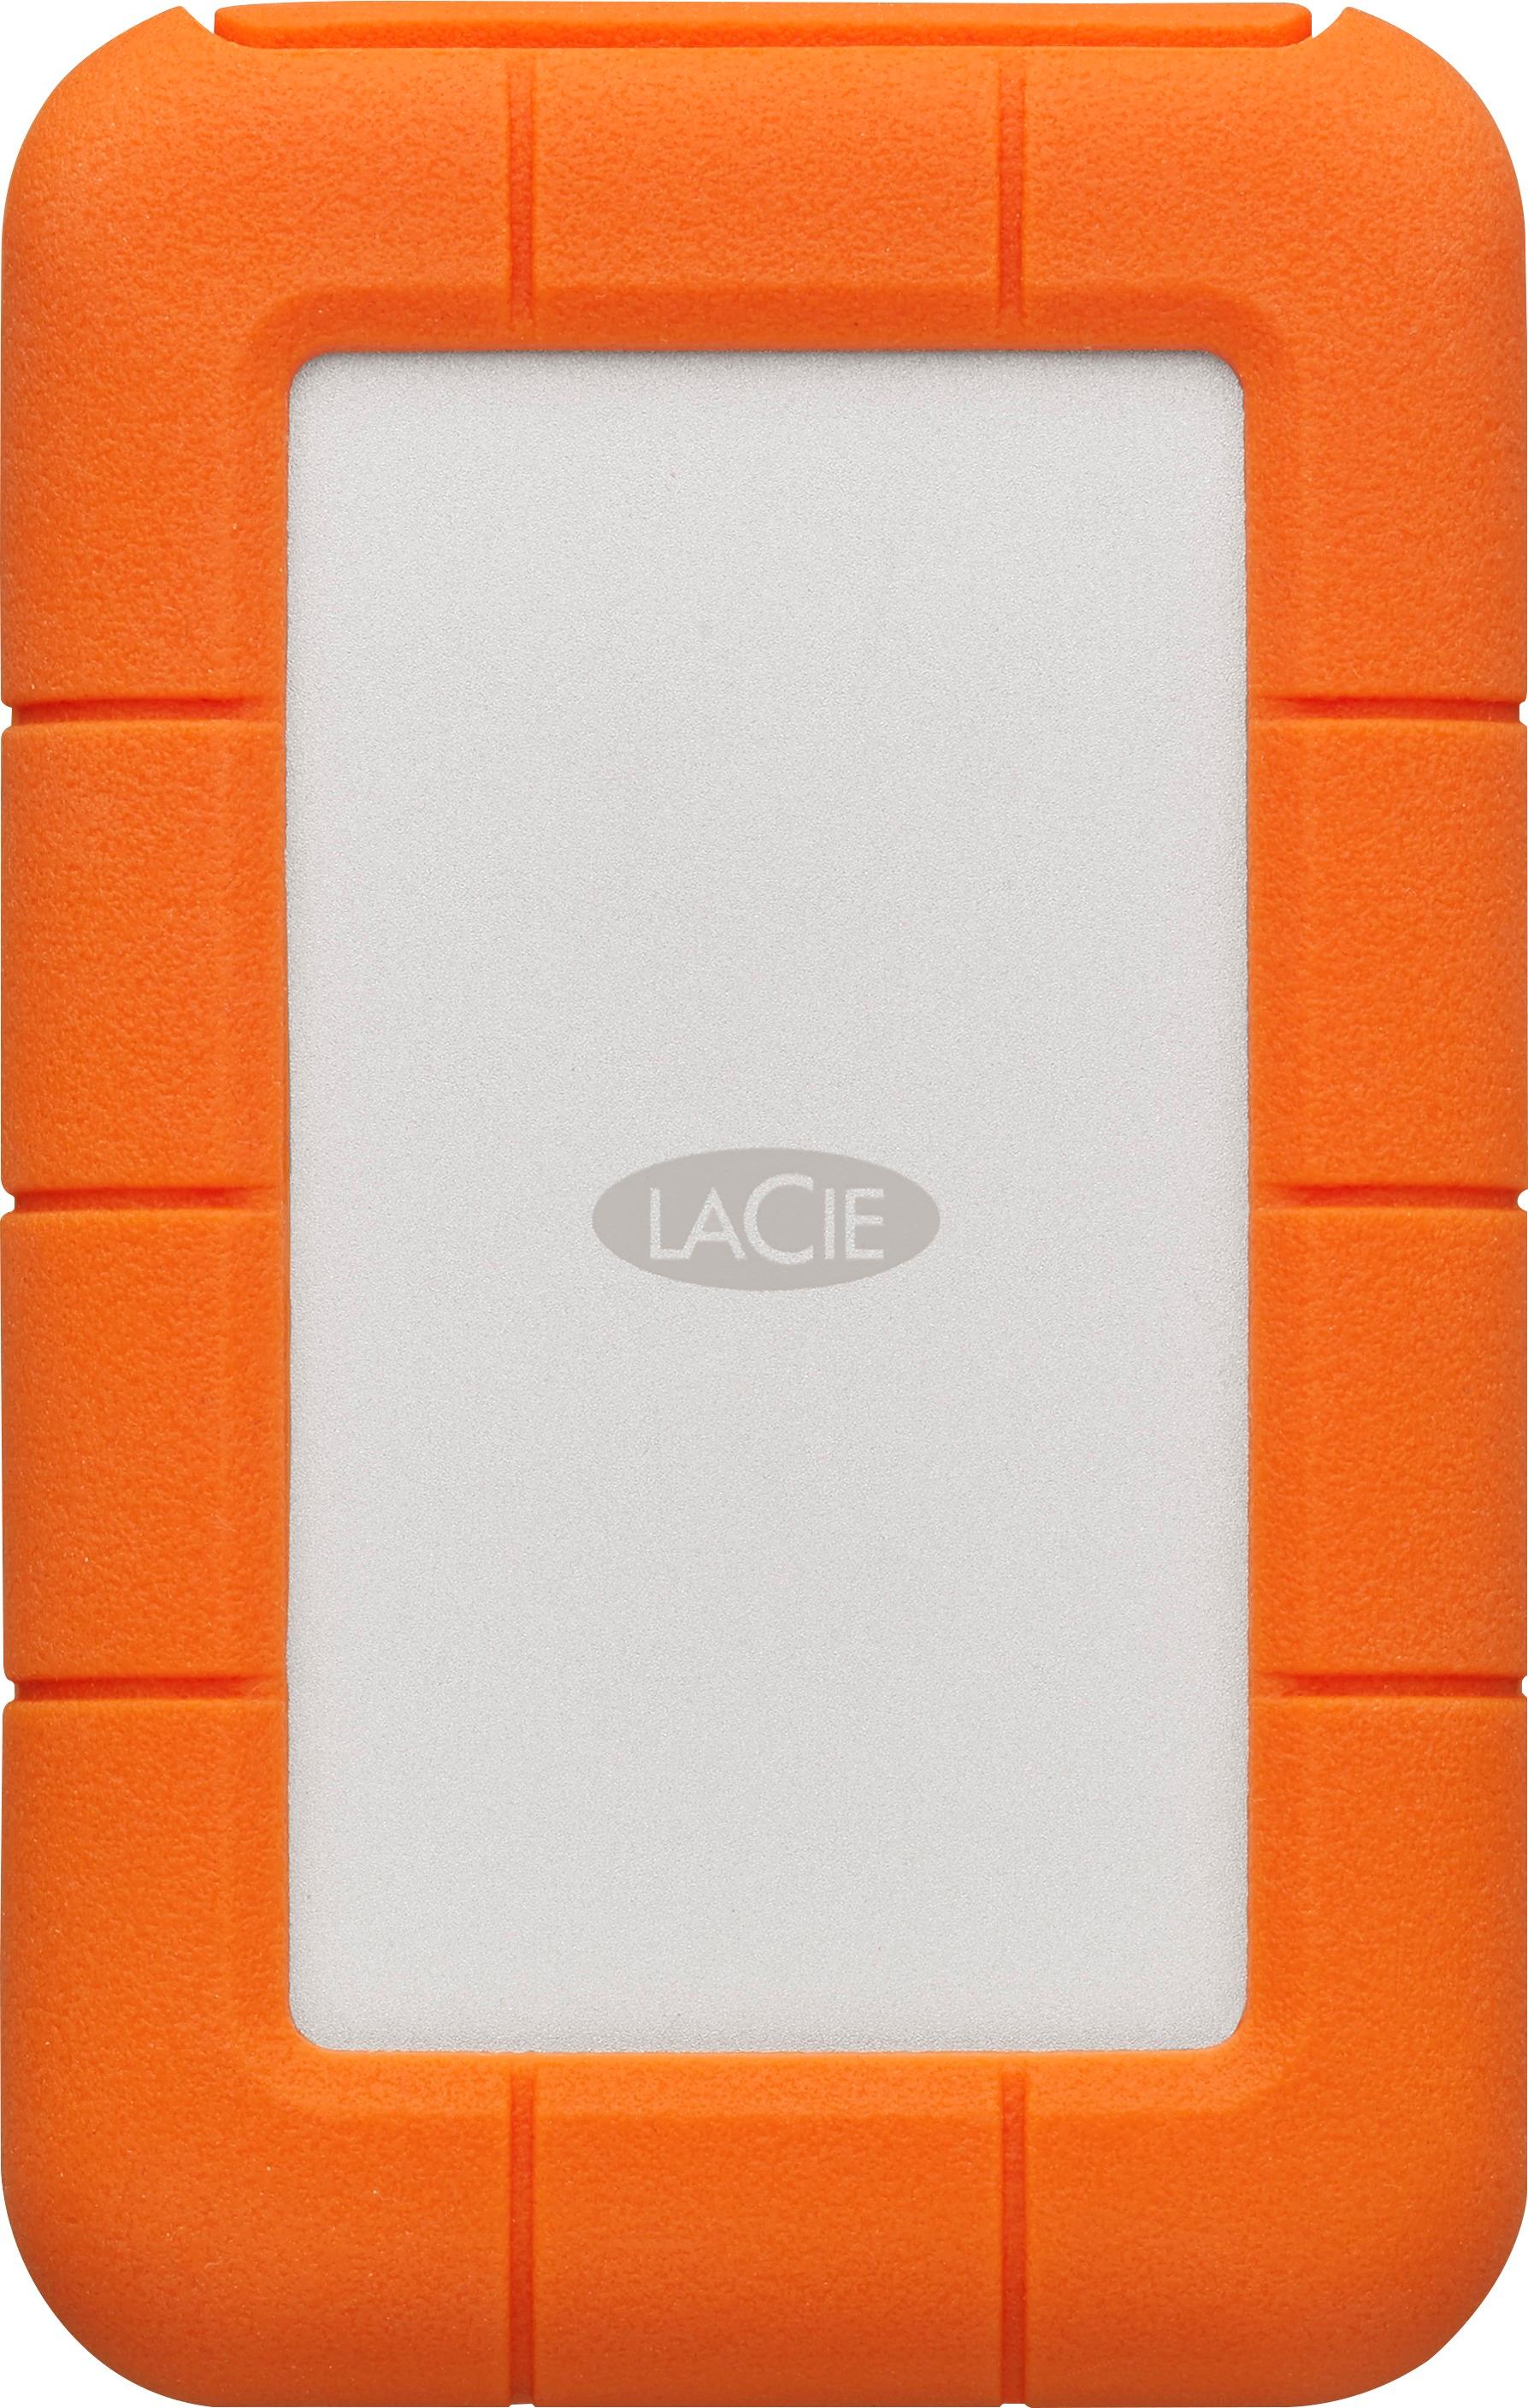 Best Buy Lacie Rugged 2tb External Thunderbolt And Usb Type C Portable Hard Drive Orange Silver Stfs2000400